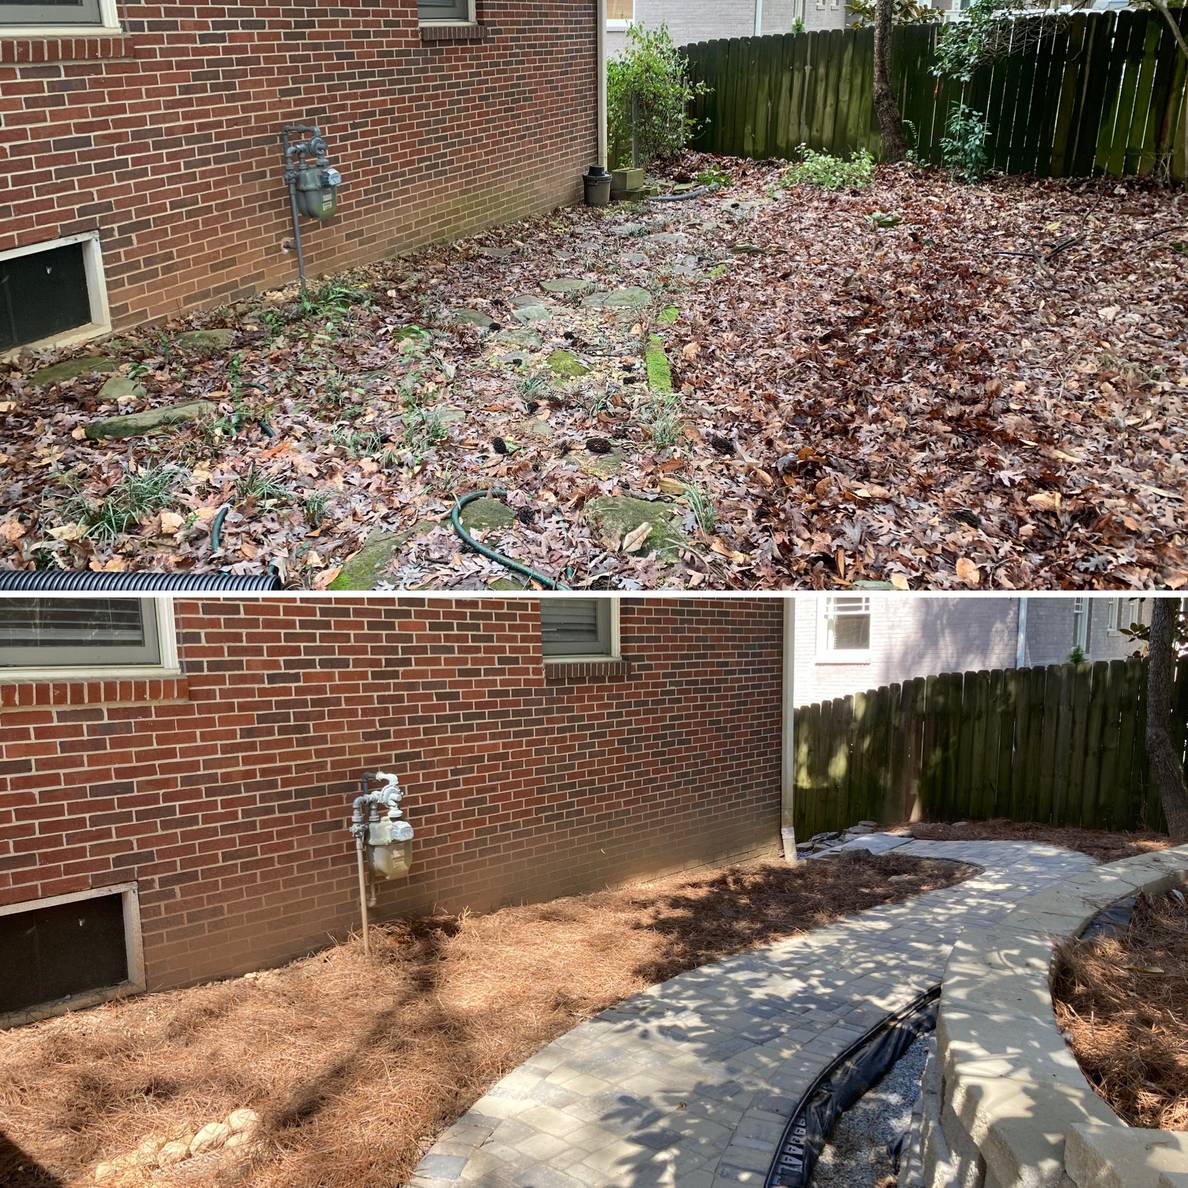 Before and After photos of a outdoor area with a house on the left. In the Before photo, the area is undefined and littered with leaves. In the after photo, a paver walkway leads around the house with a wall on the right and a planting bed on the left.